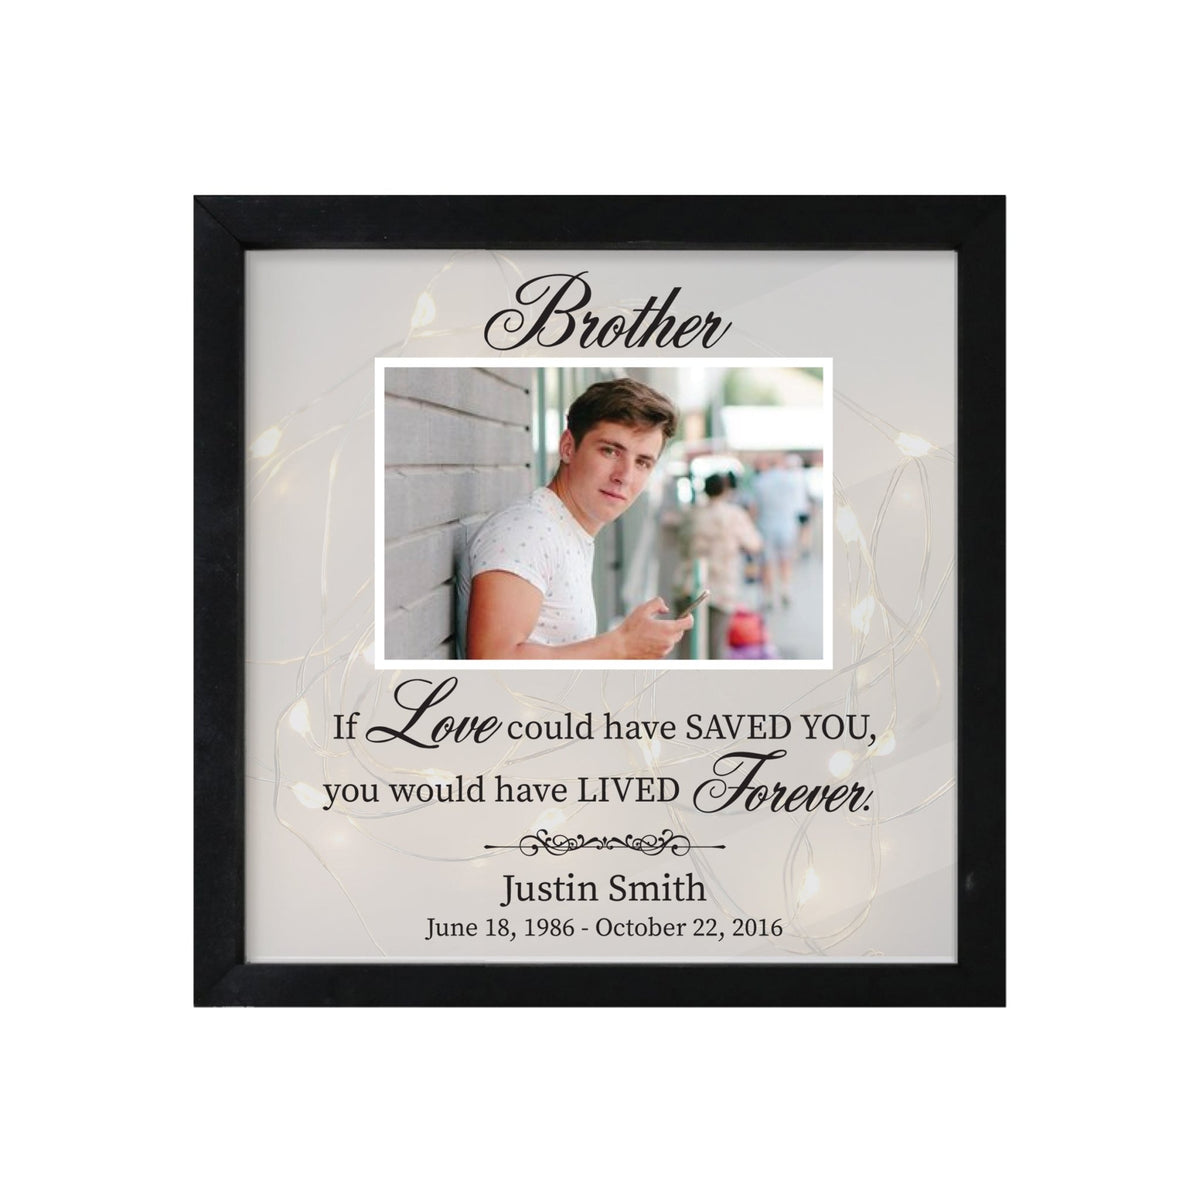 Personalized Memorial Black Framed Shadow Box With Lights Sympathy Gift &amp; Wall Décor - If Love Could (Brother) - LifeSong Milestones